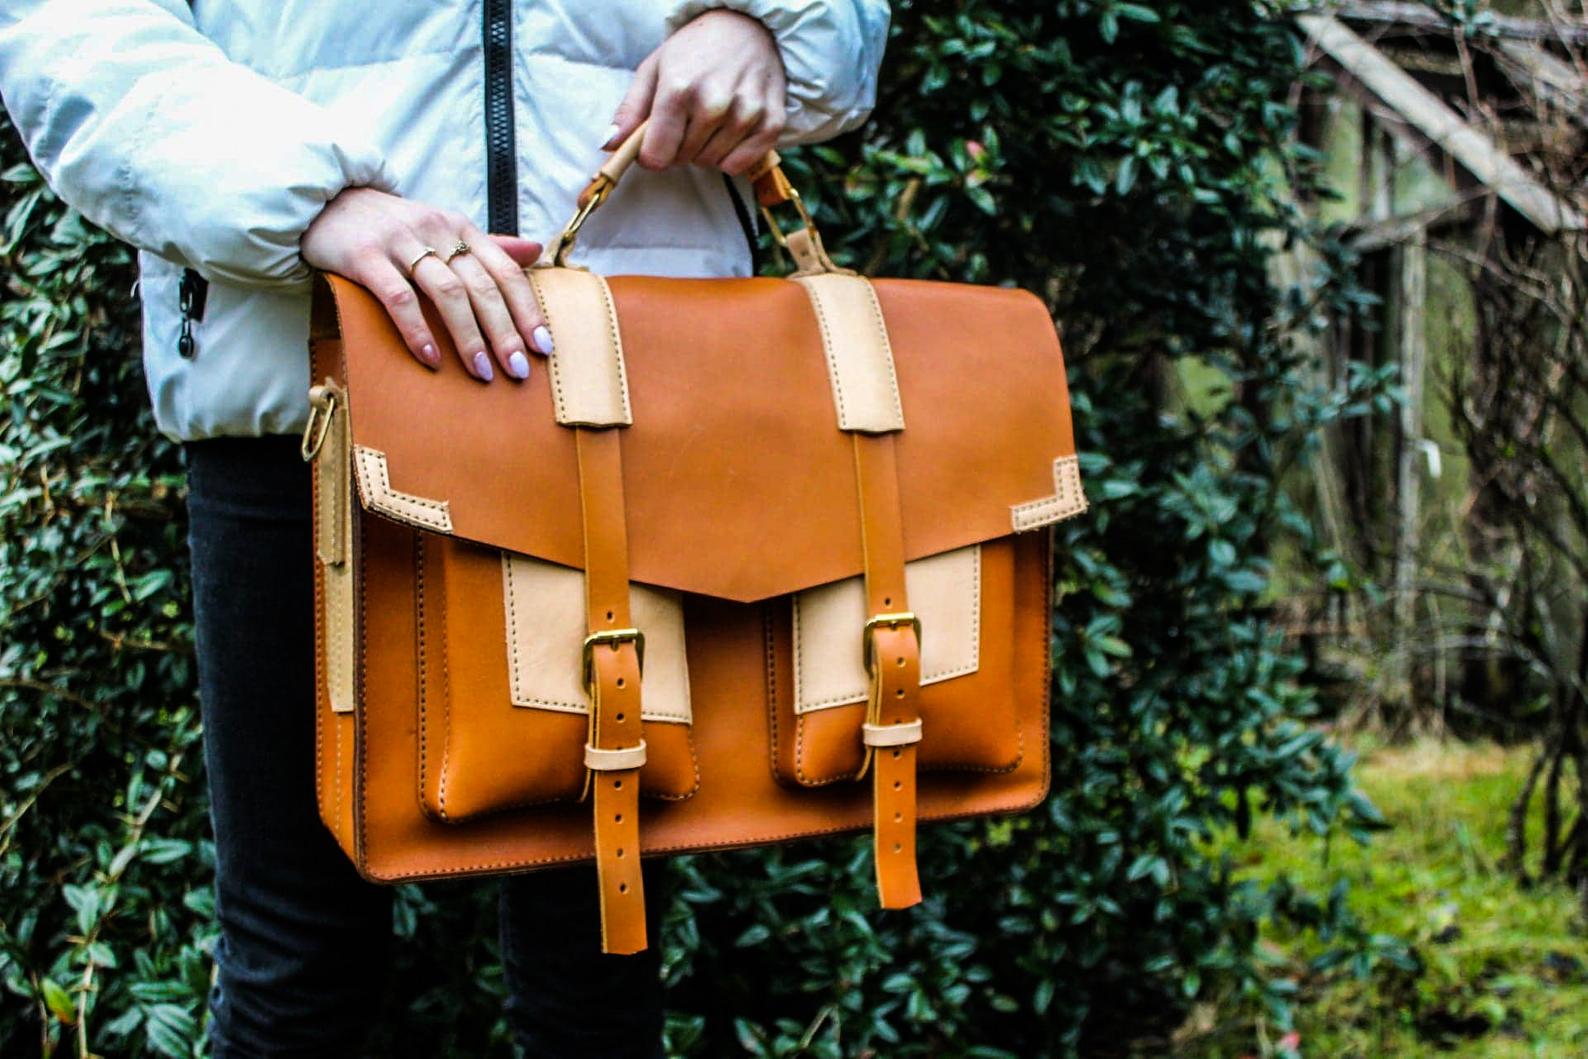 Free pattern Briefcase laptop bag from Creative awl